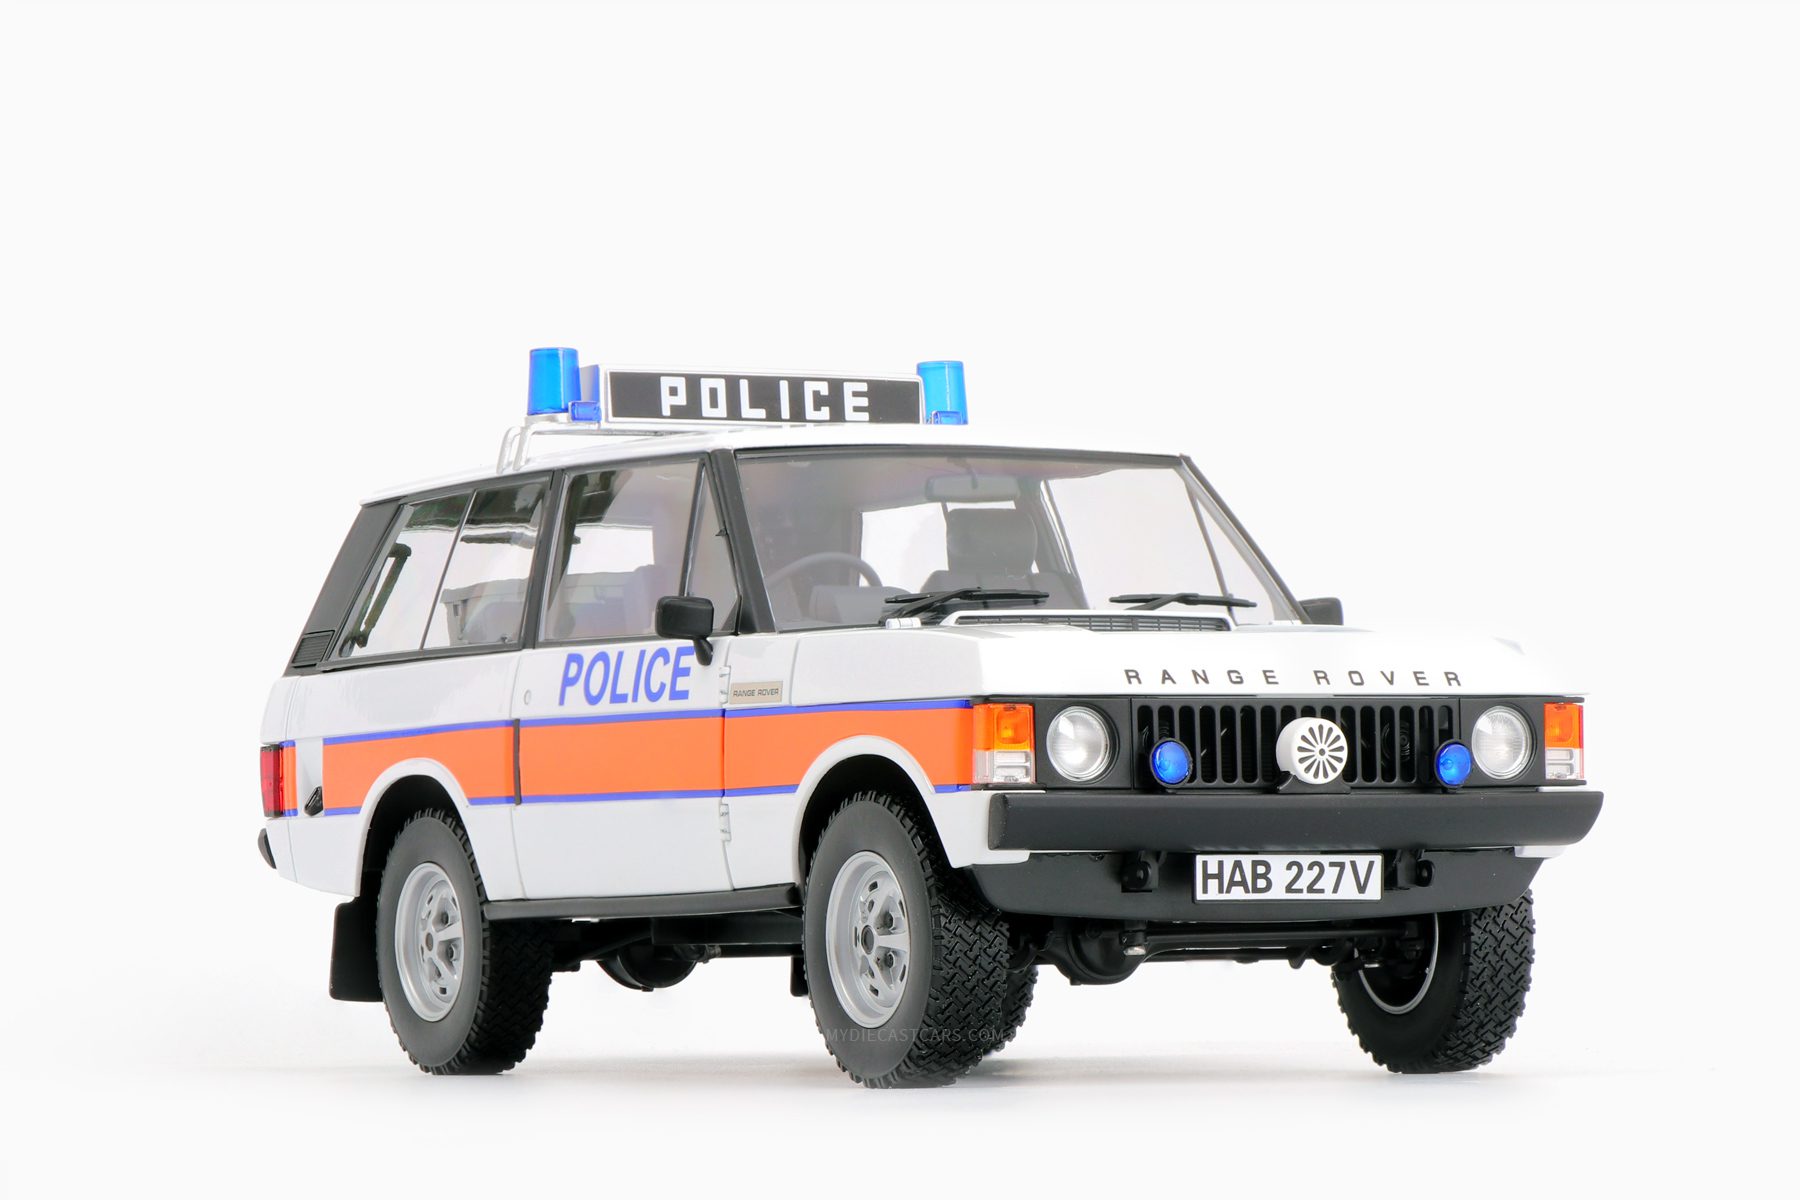 range-rover-police-almost-real-1w.jpg